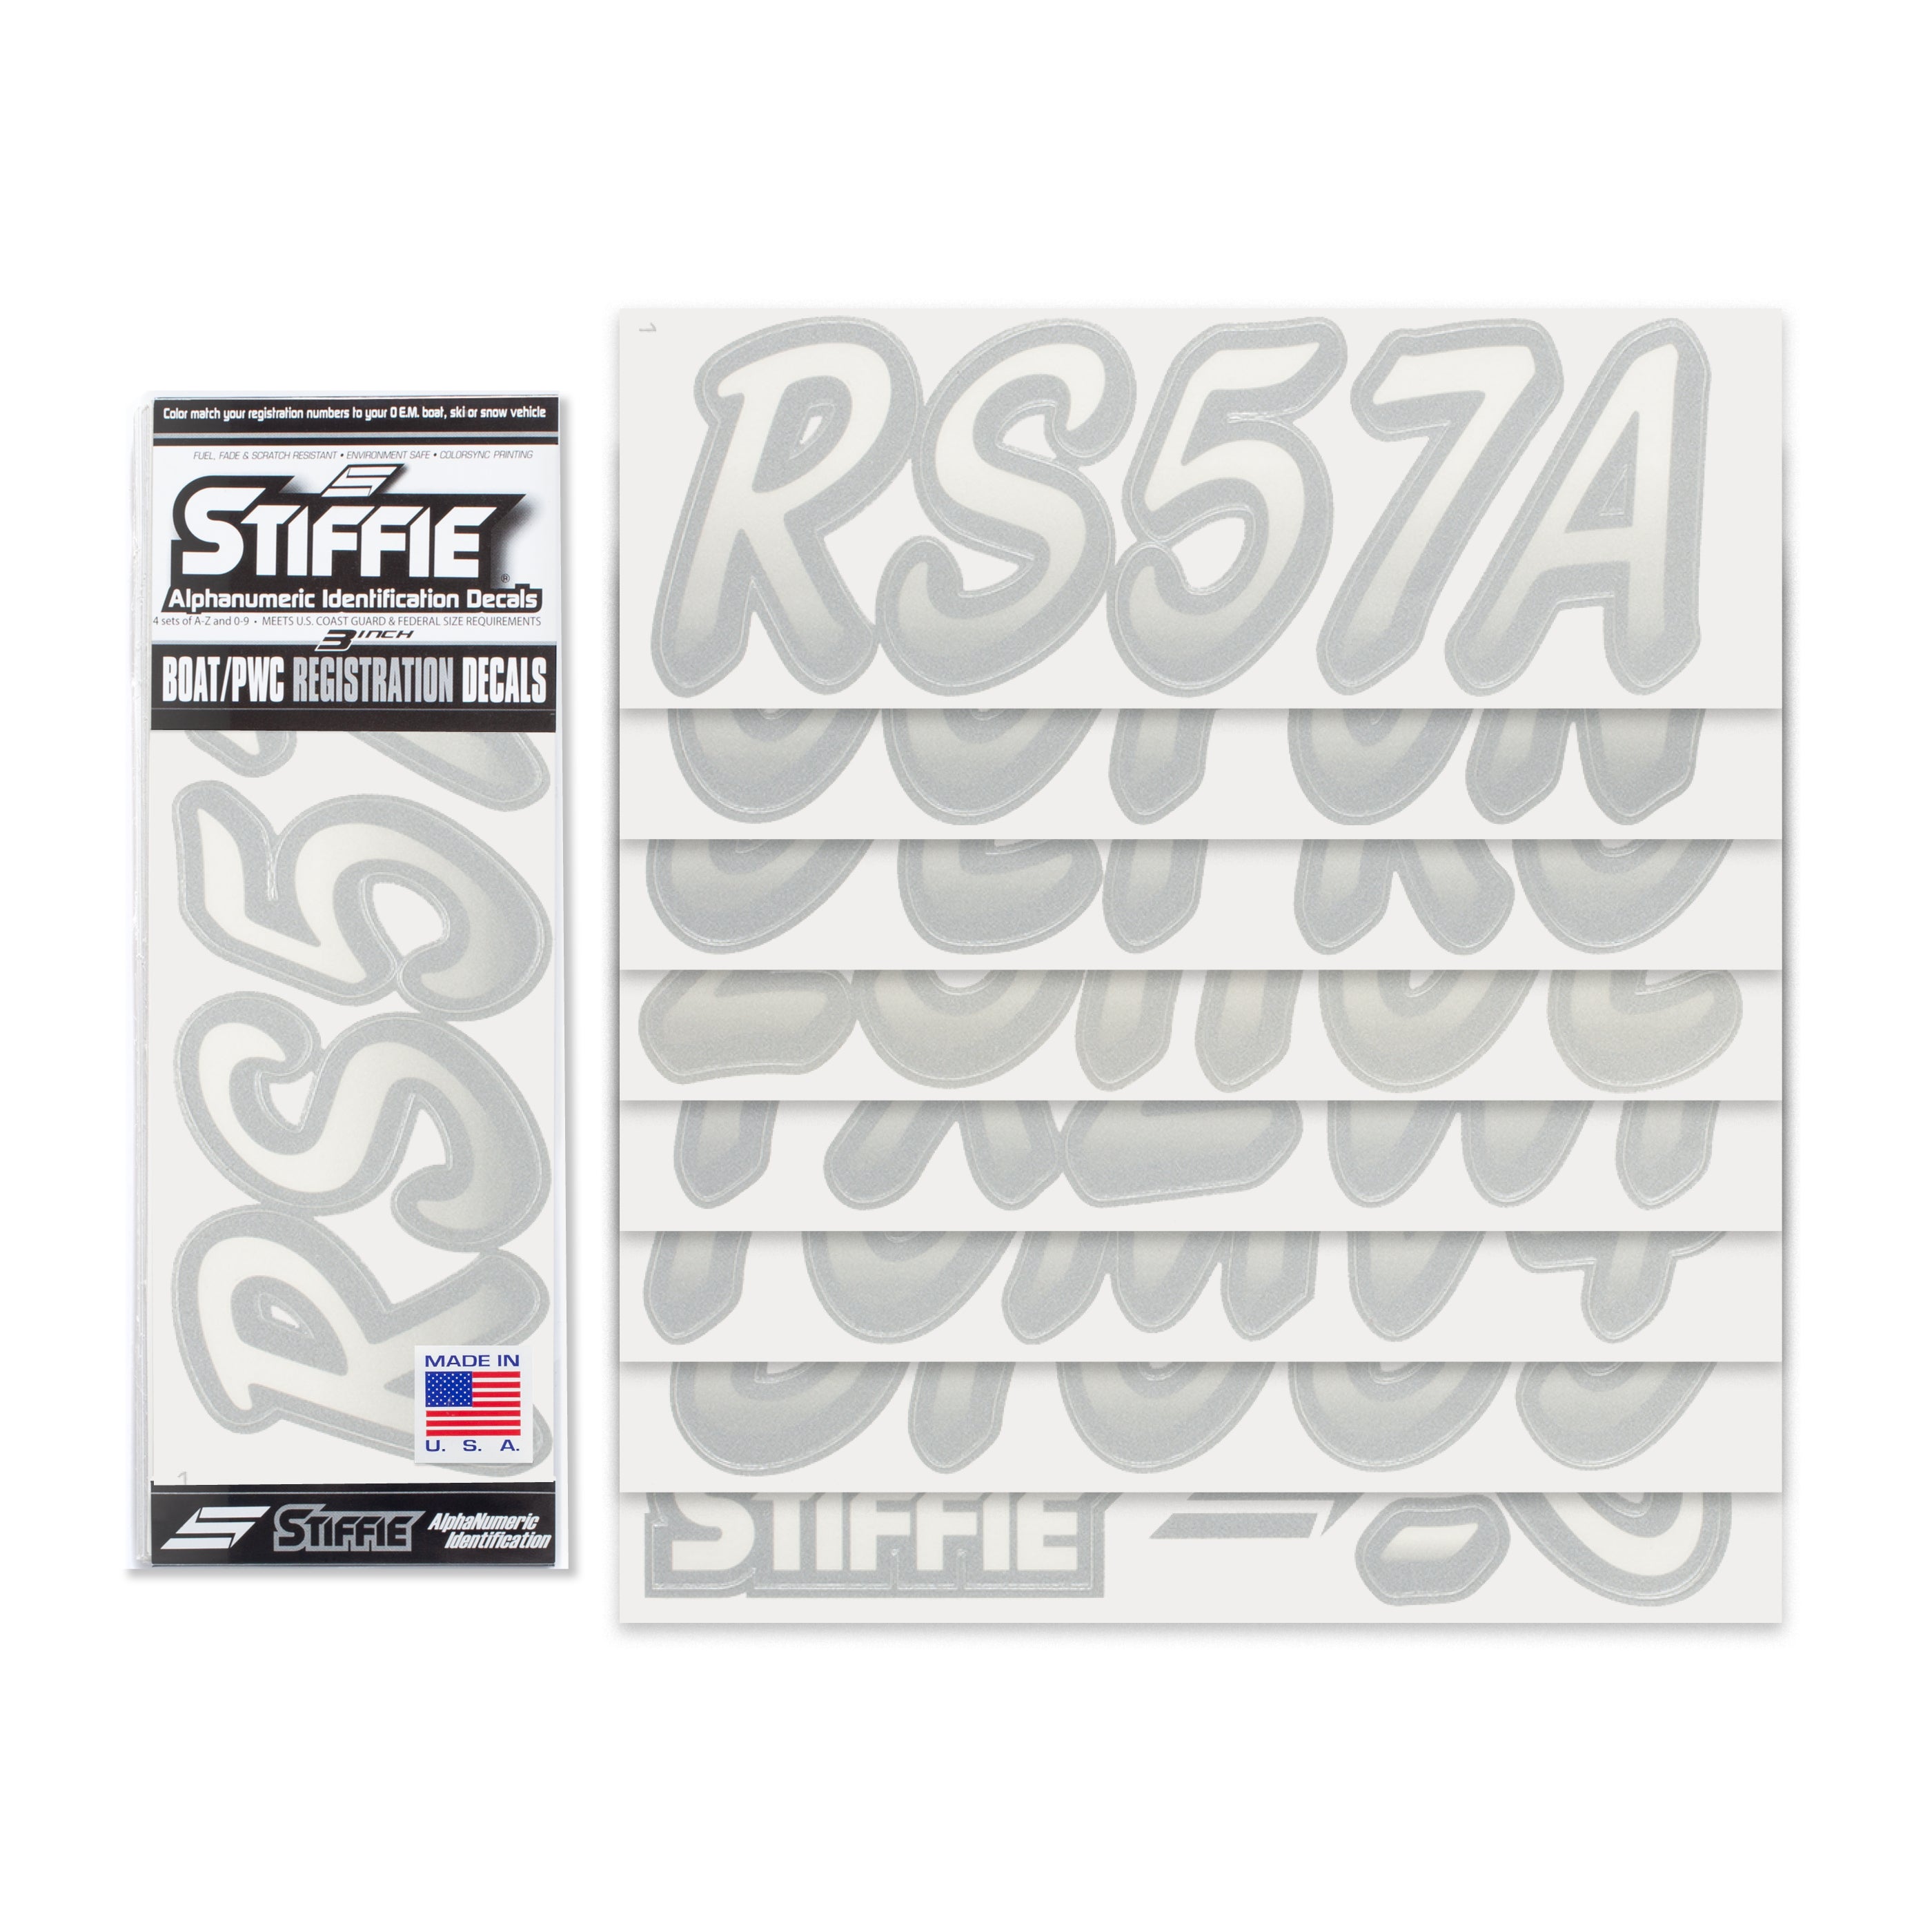 STIFFIE Whipline Trancparent Clear / Silver 3" Alpha-Numeric Registration Identification Numbers Stickers Decals for Boats & Personal Watercraft